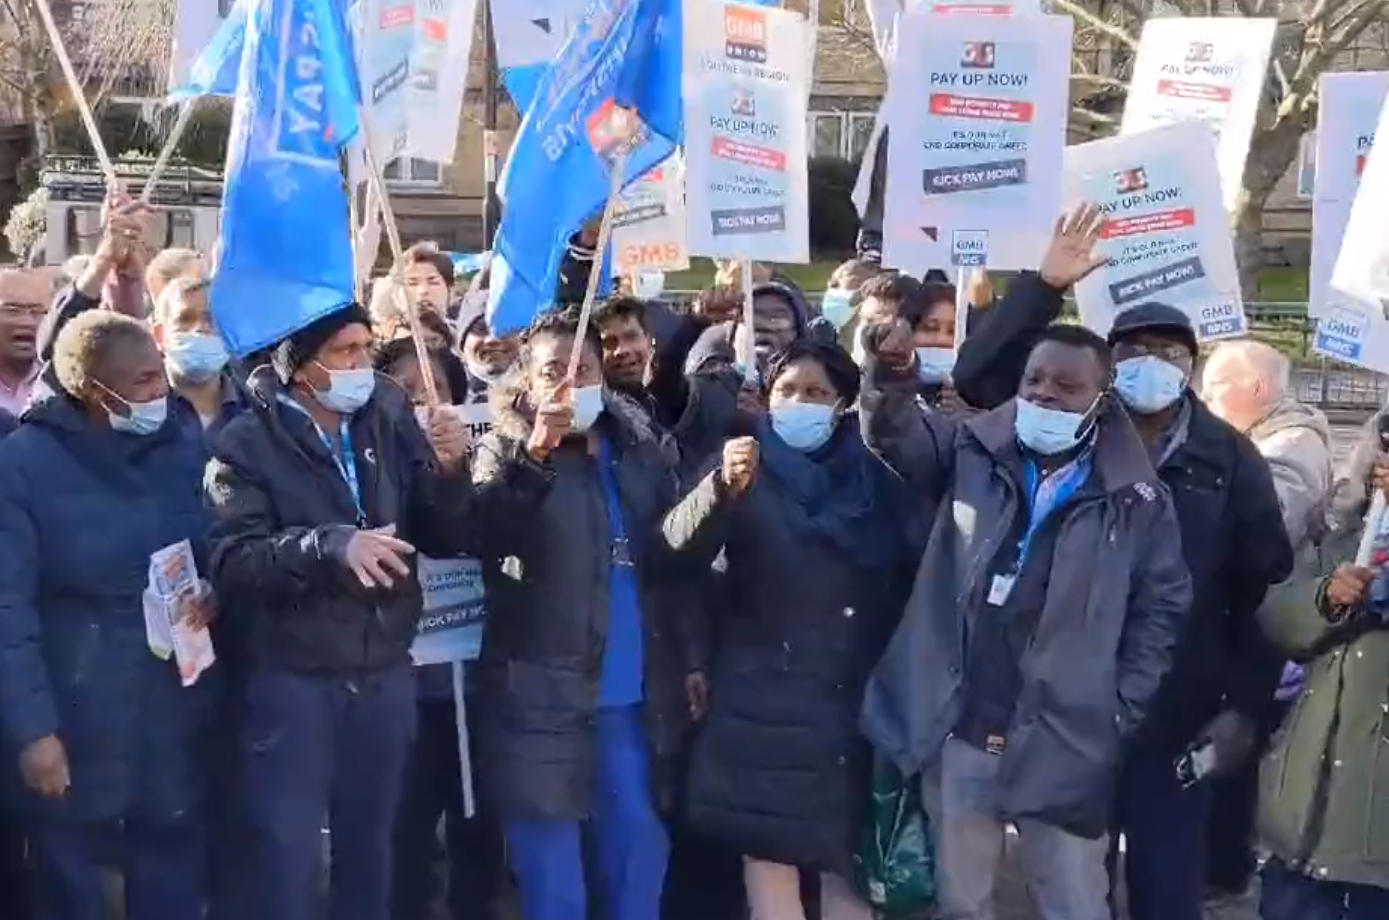 Hospital staff employed by G4S protested outside Croydon Hospital on Monday over Covid sick pay